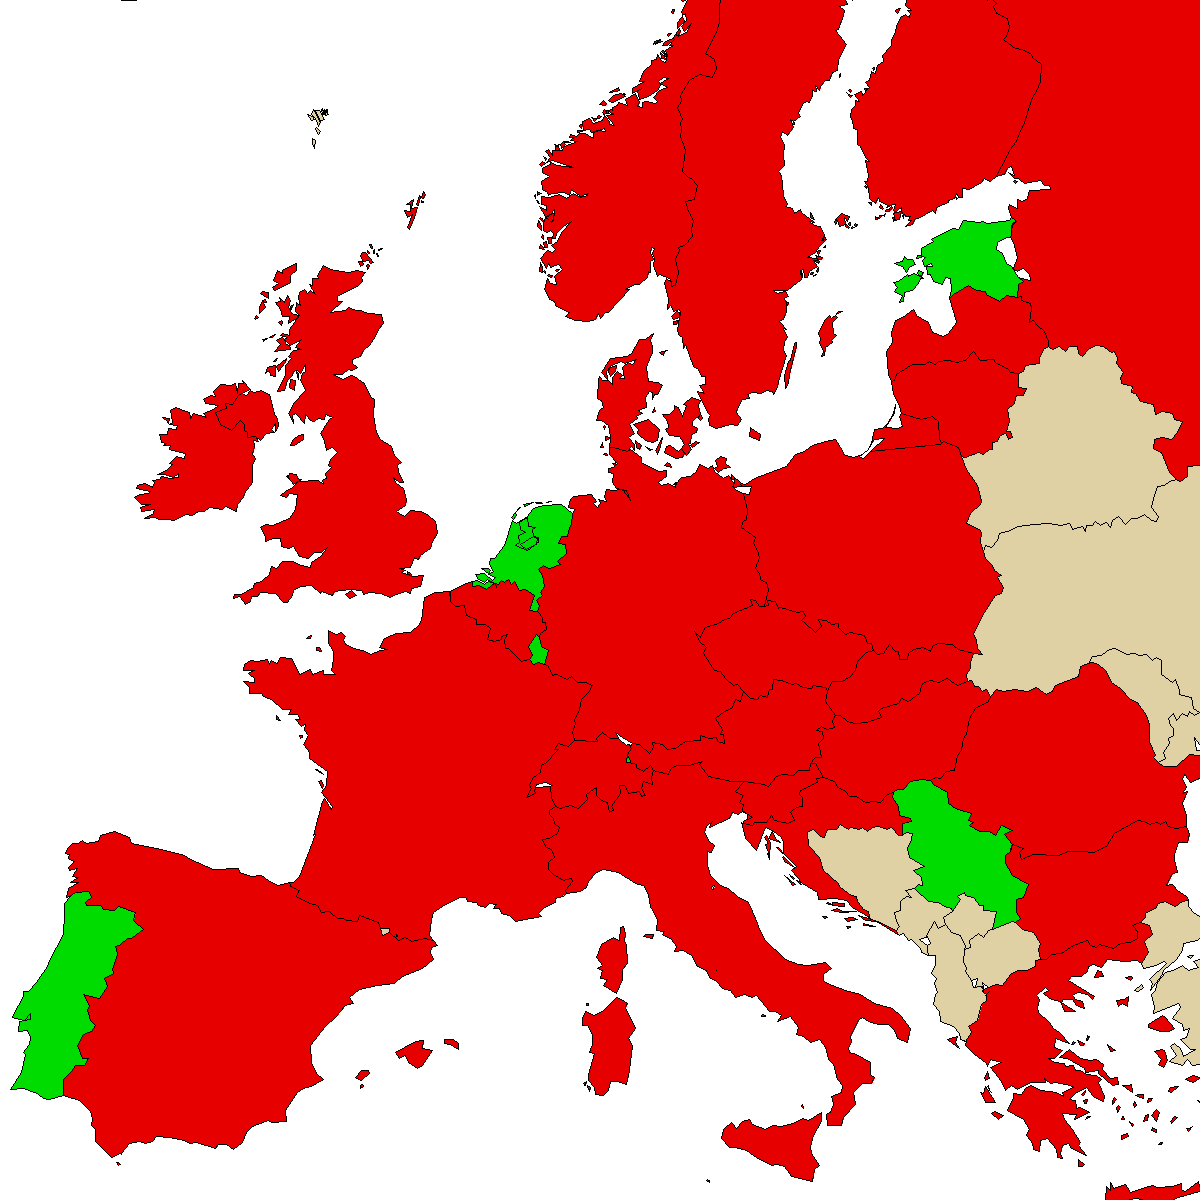 legal info map for our product 3CMC, green are countries with no ban, red with ban, grey is unknown